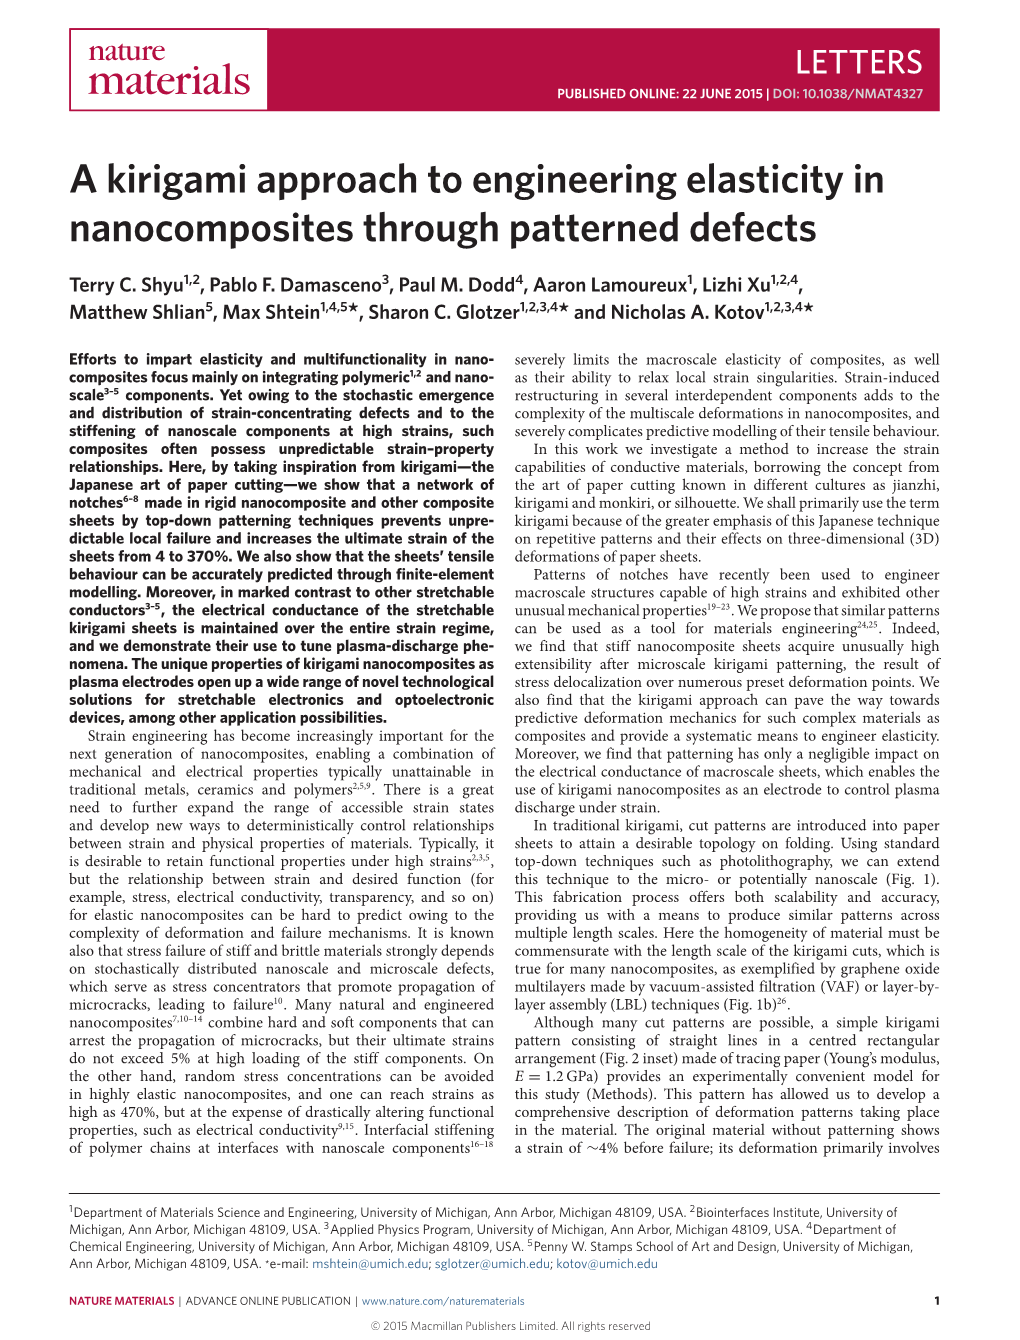 A Kirigami Approach to Engineering Elasticity in Nanocomposites Through Patterned Defects